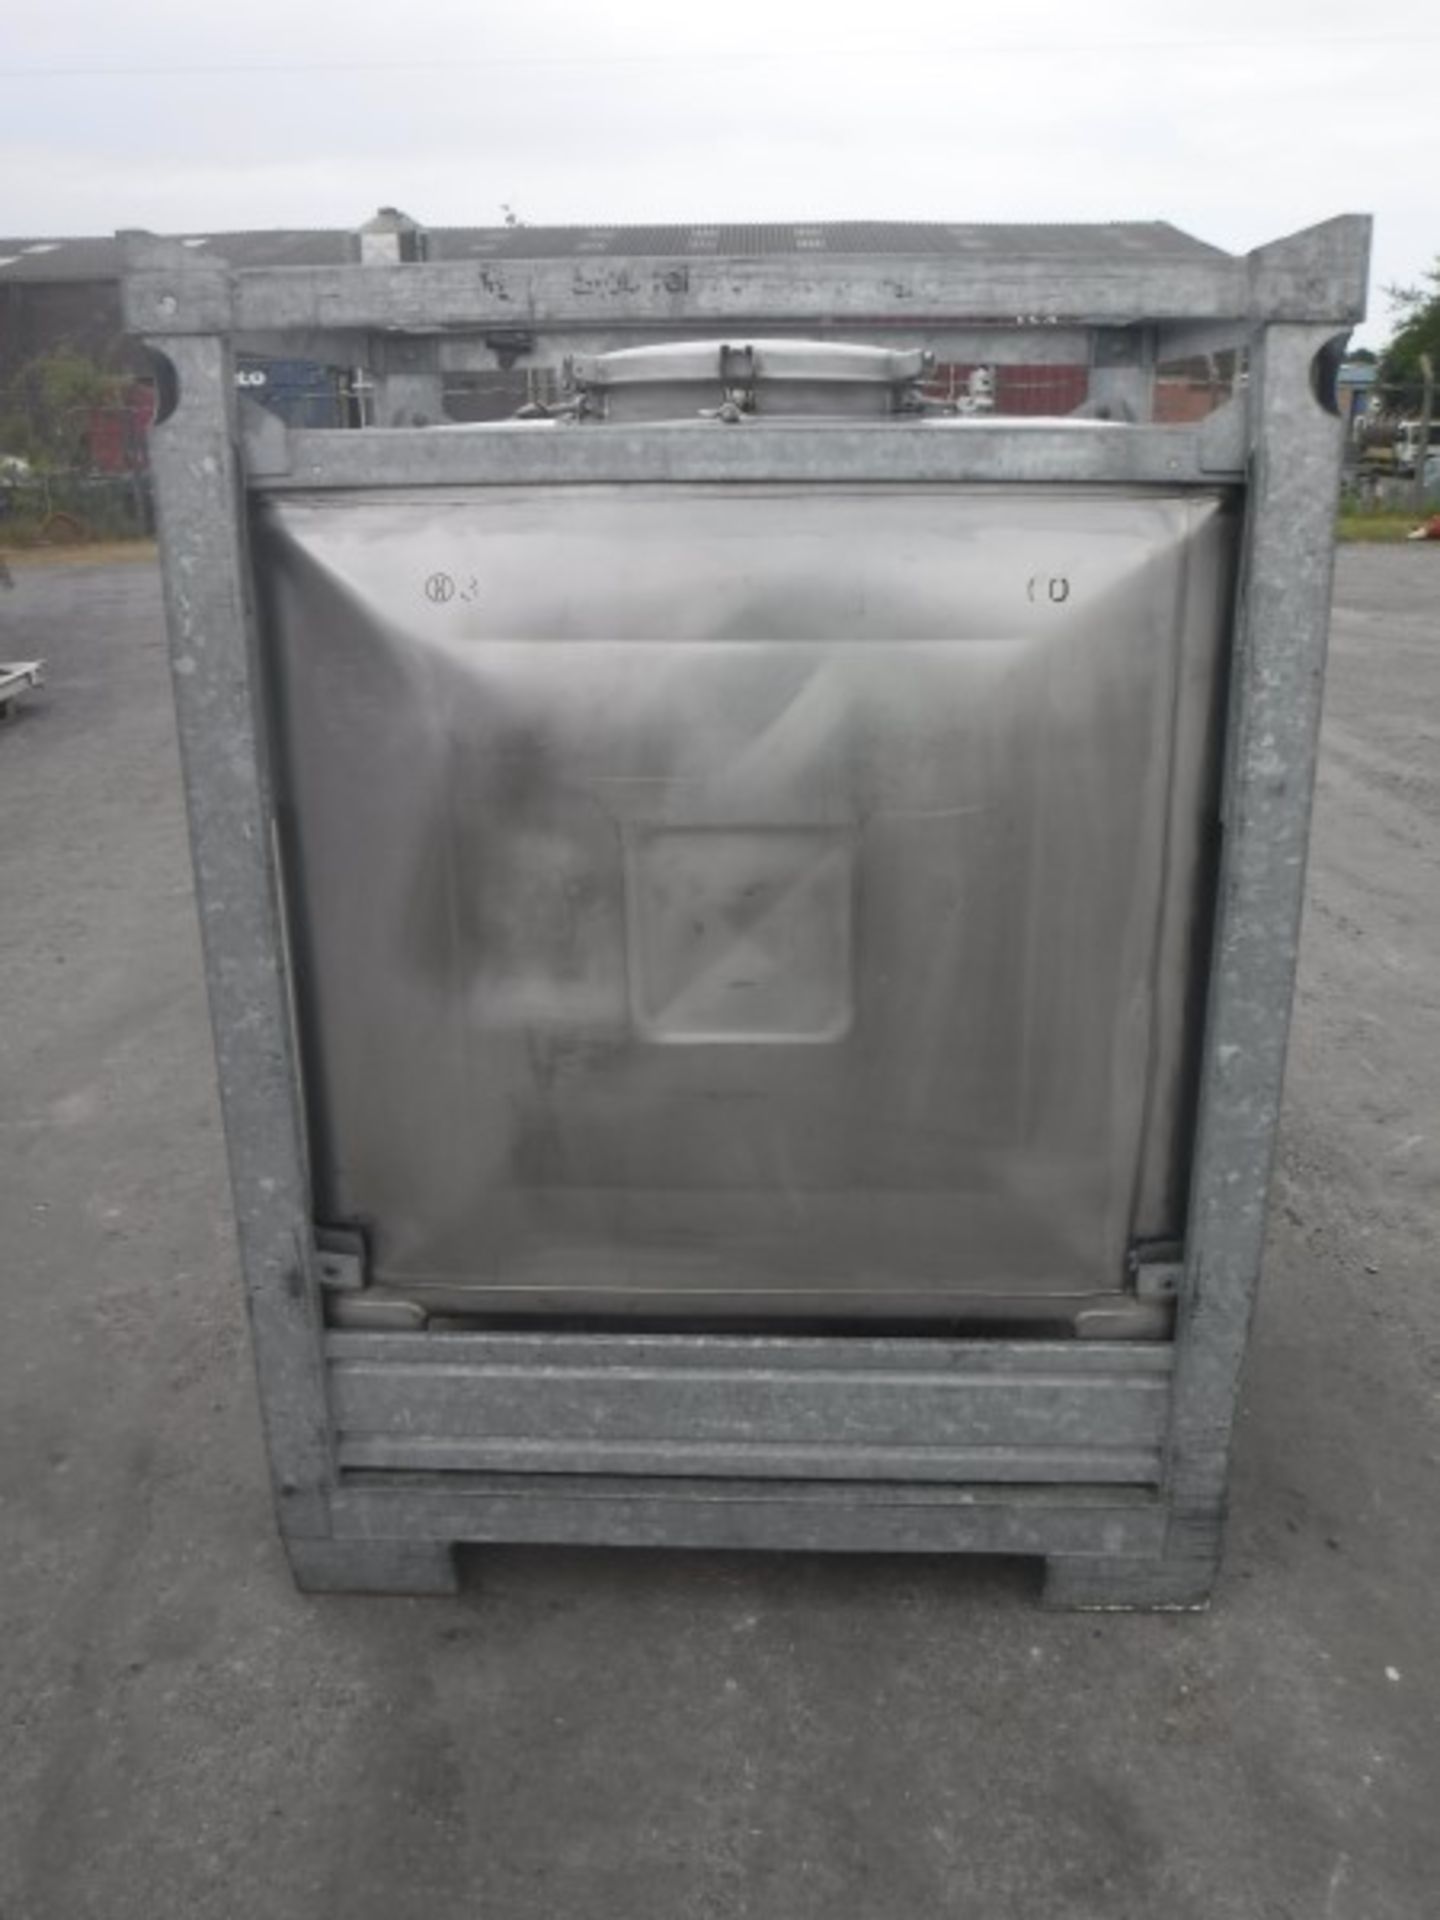 Stainless Steel IBC with Galvanised Protective Frame and Base (Frame can be removed if not neaded) - Image 4 of 8